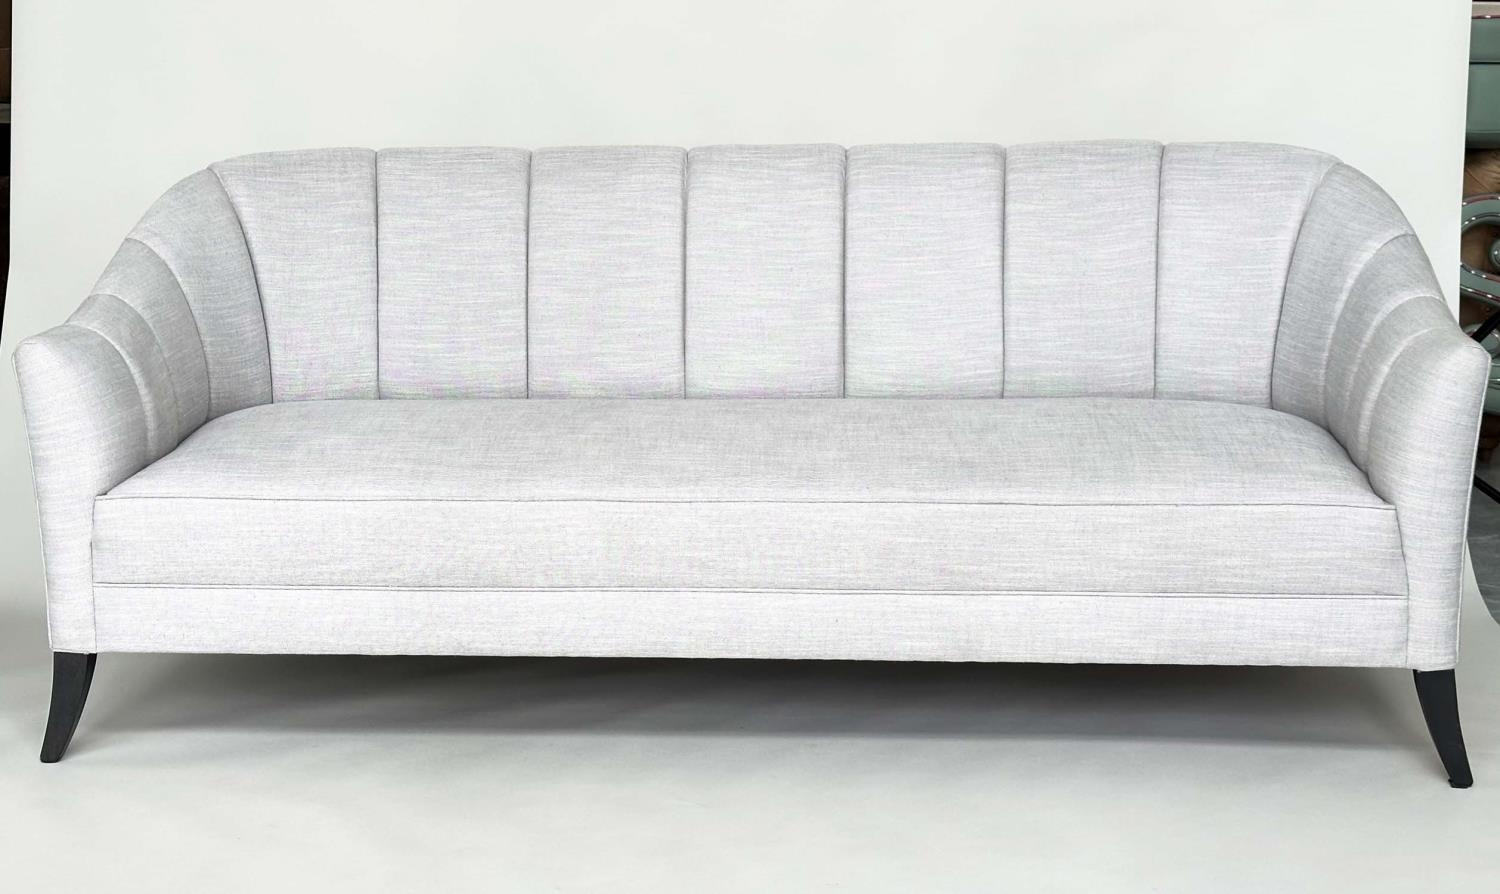 BRAY DESIGN SOFA, ribbed curved back and out swept supports, in Sahco Flint fabric upholstery, 210cm - Image 2 of 11